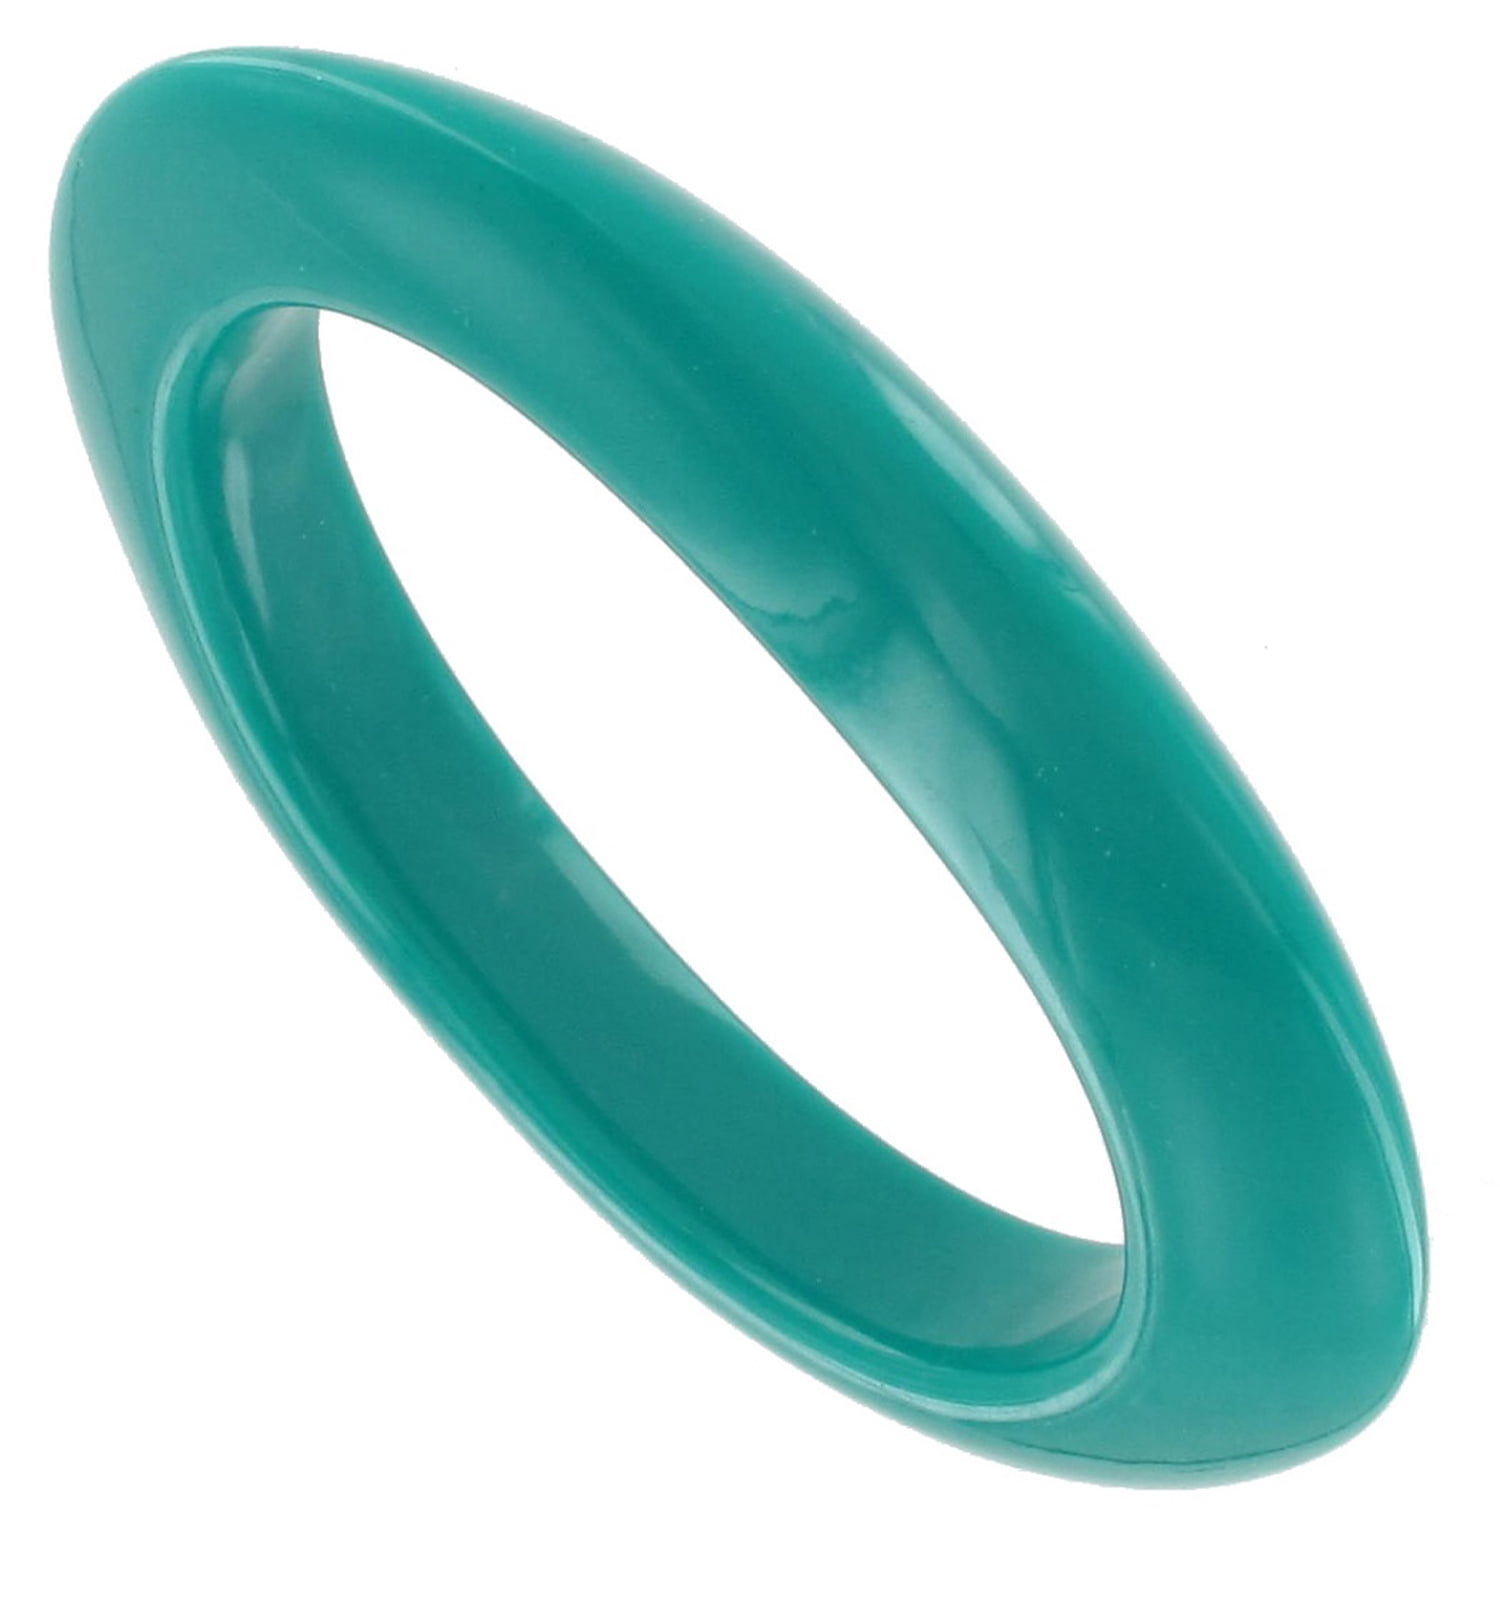 Bright Teal Green Italy Lucite Oval Bangle Bracelet